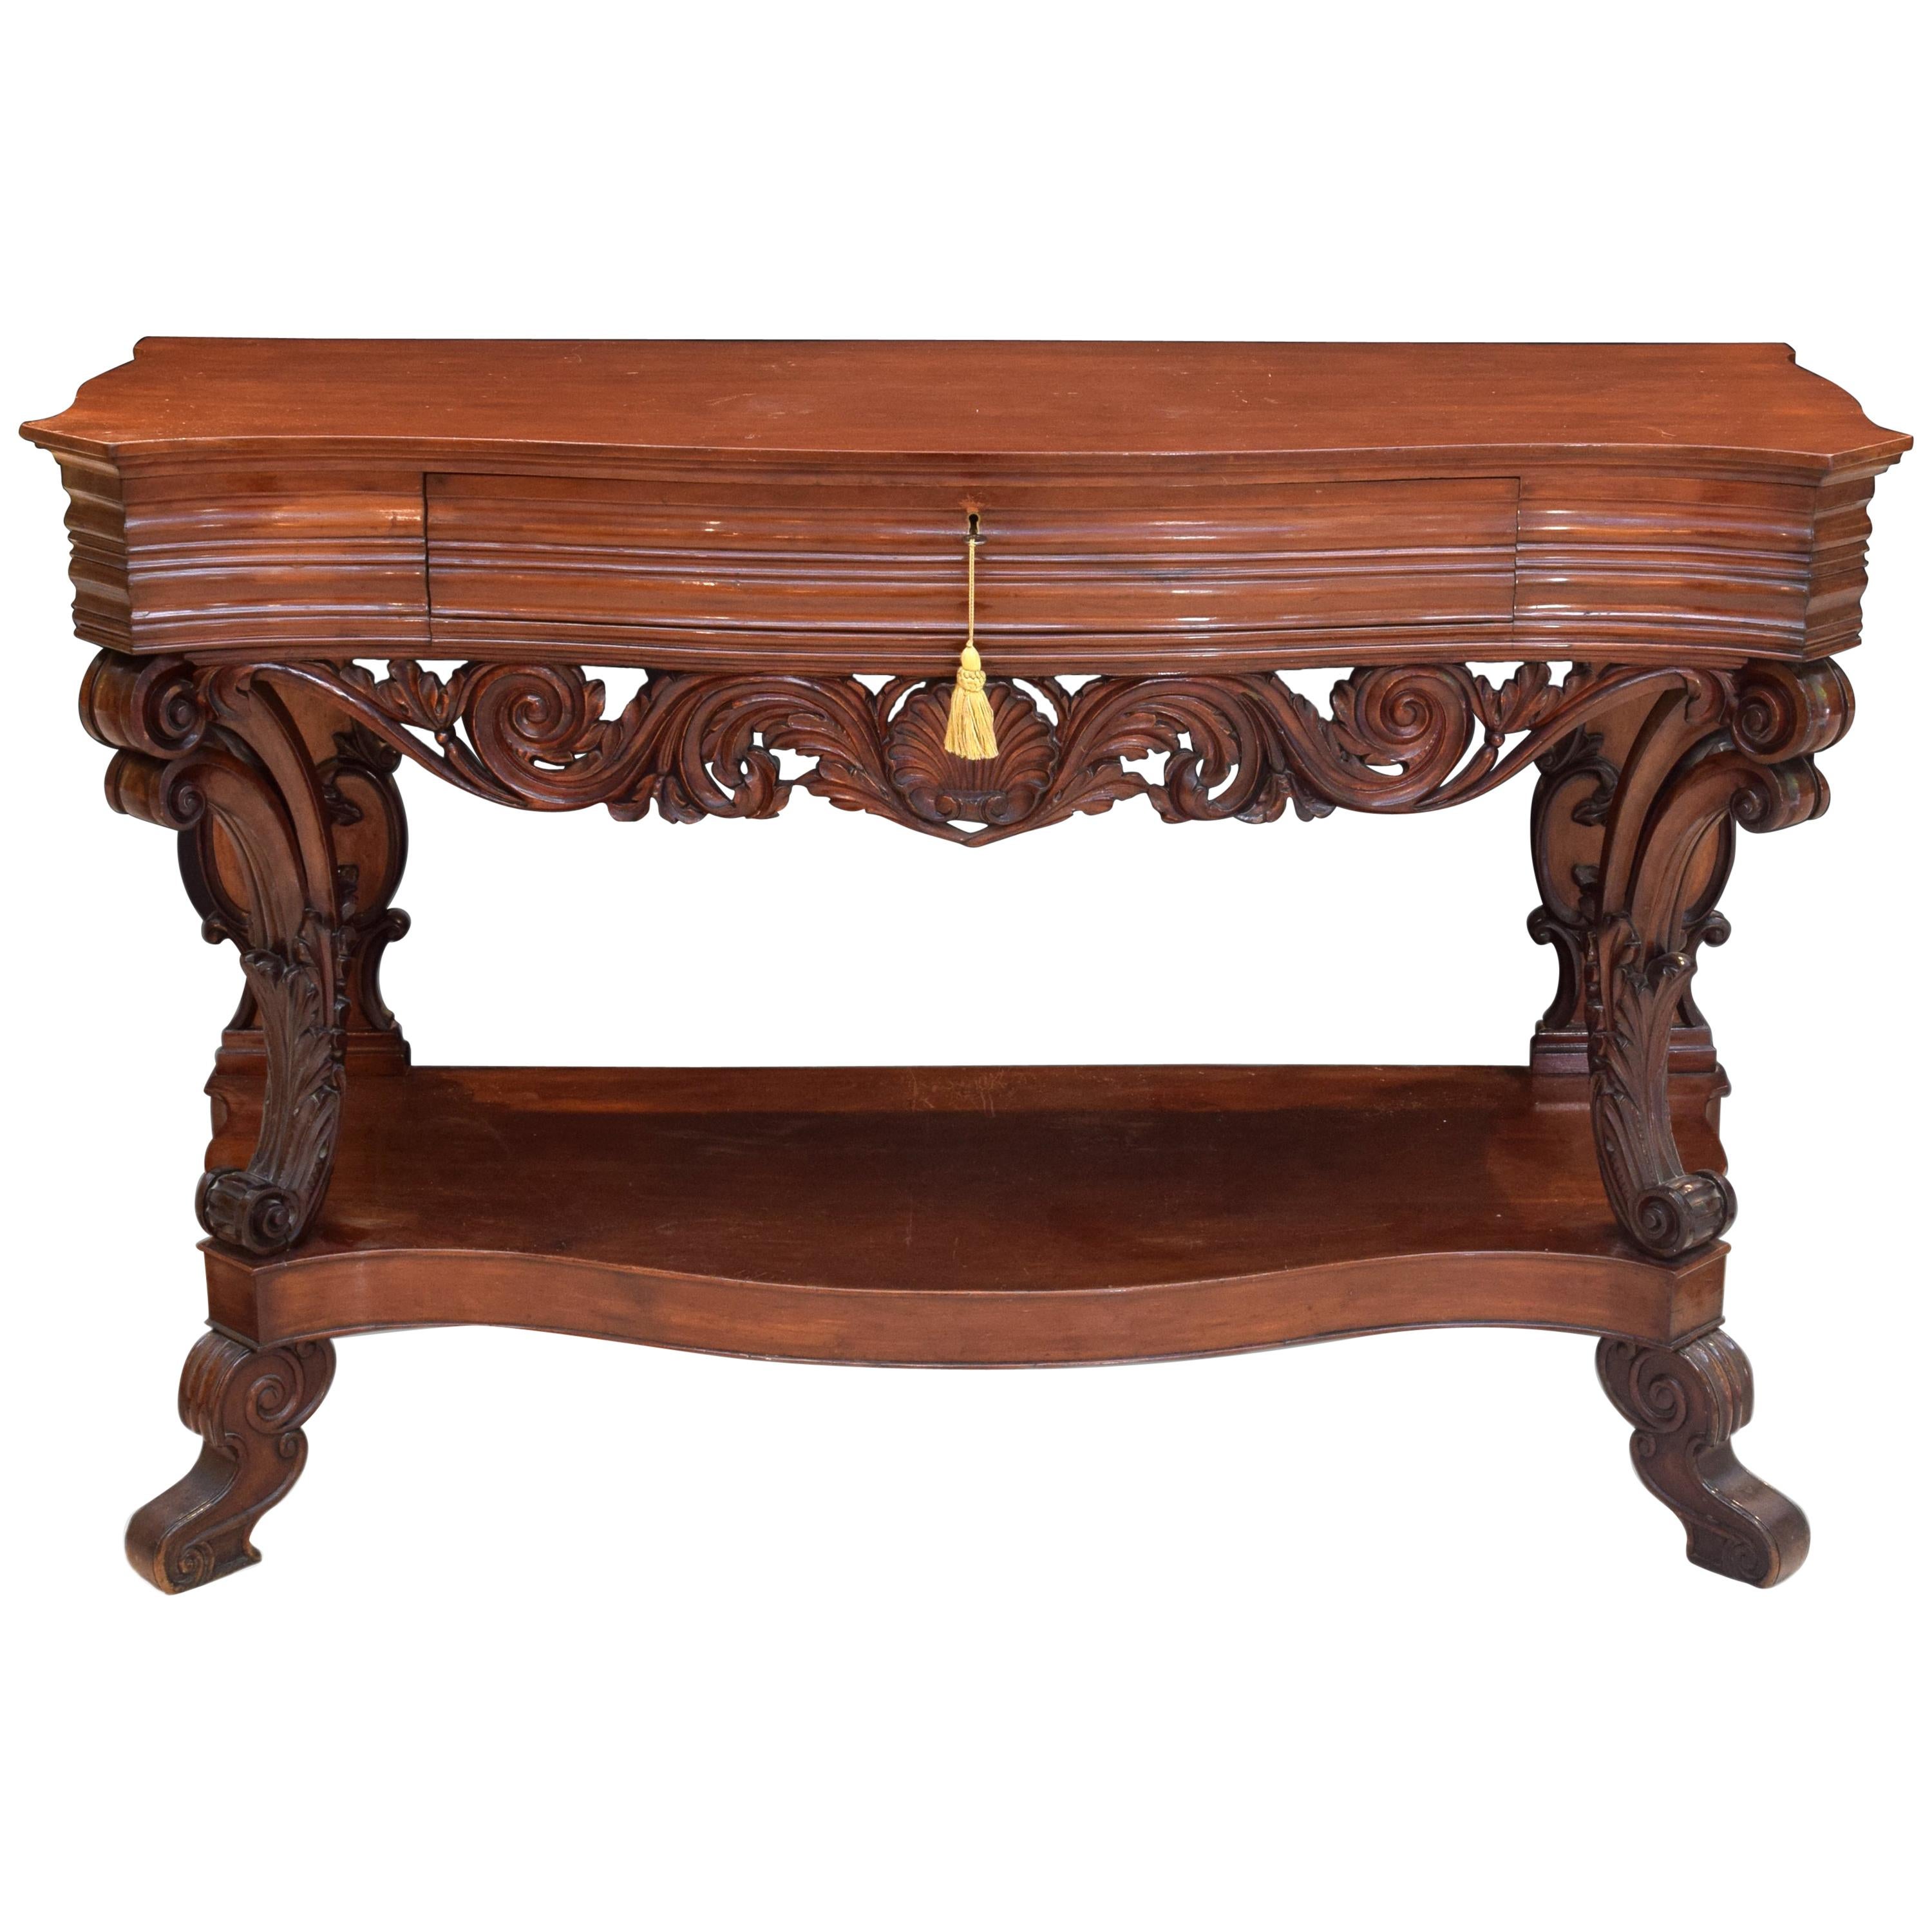 Mahogany Console Table with Drawer, England, 19th Century